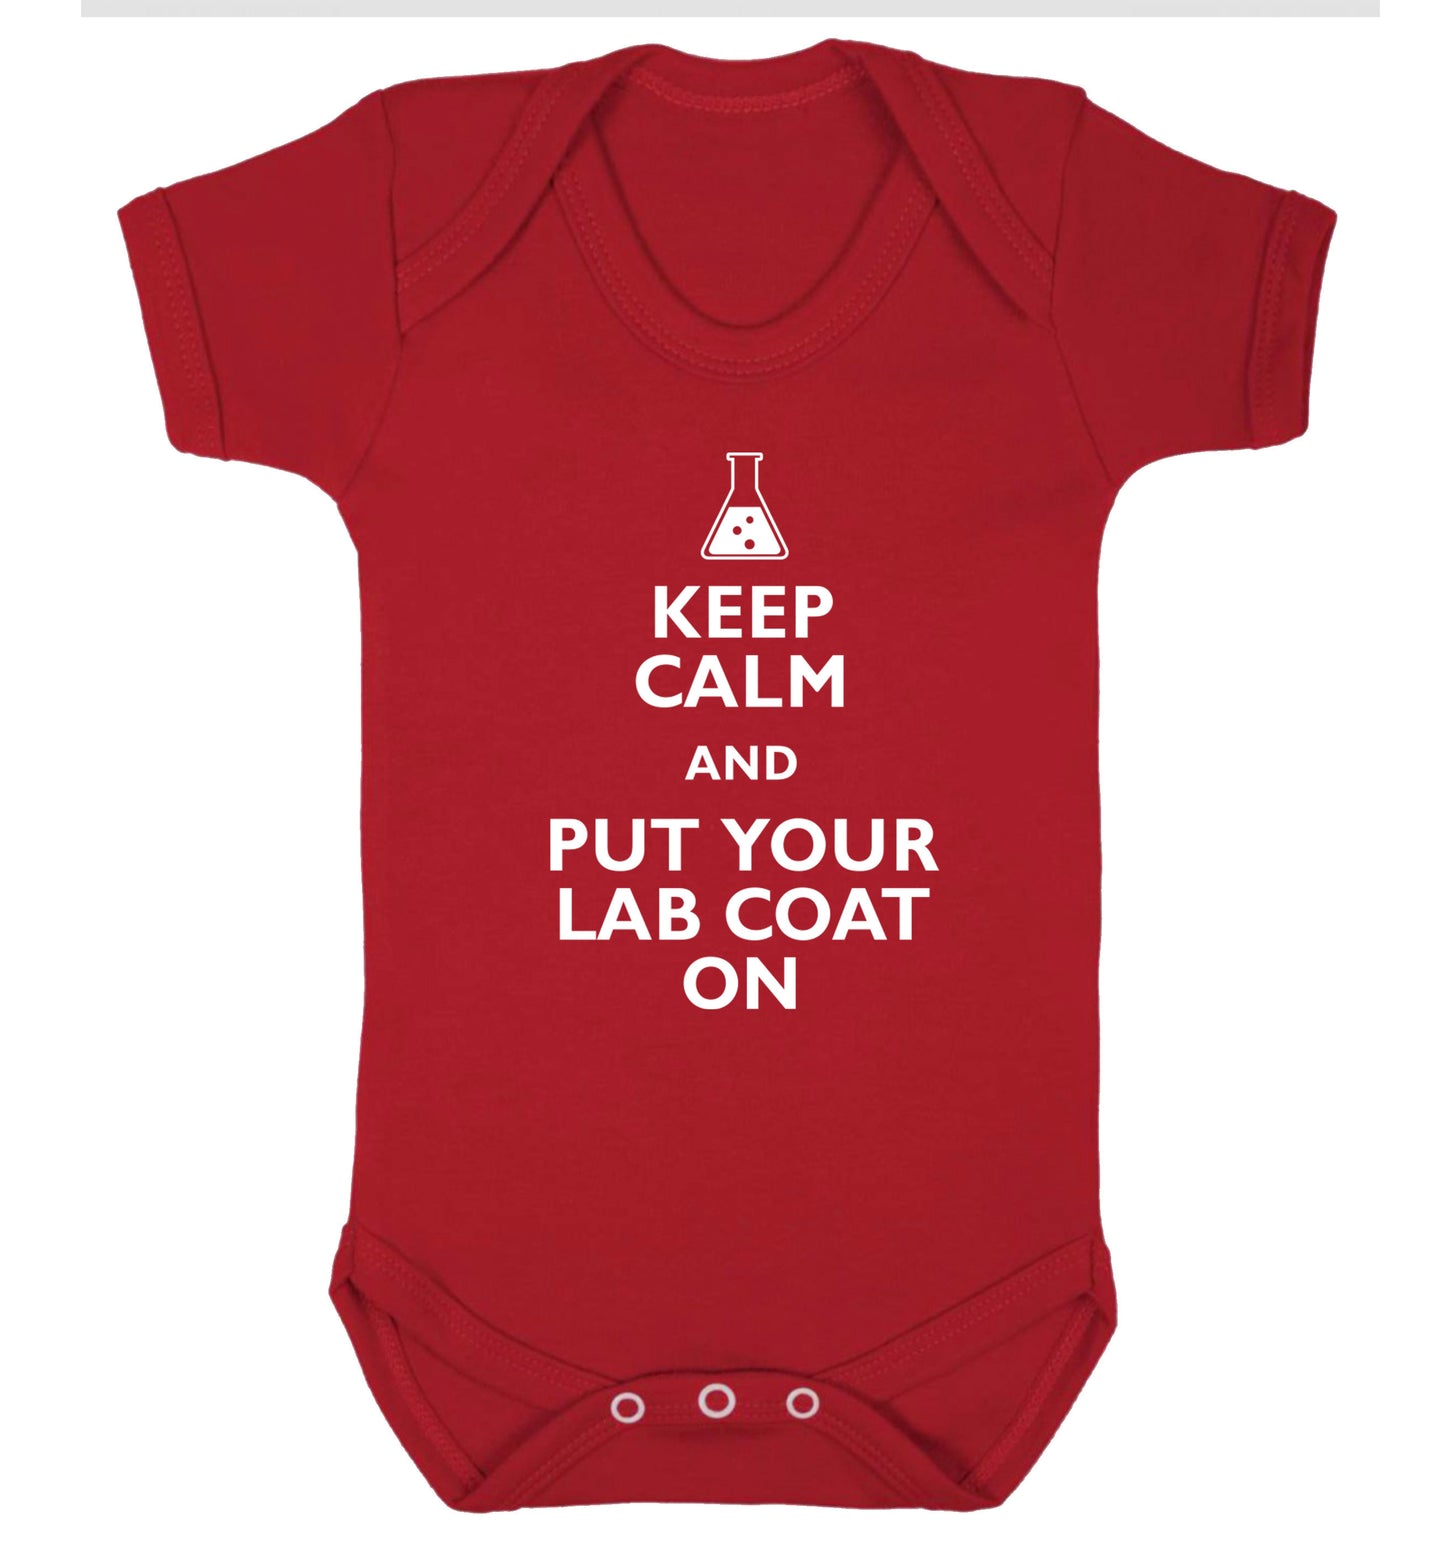 Keep calm and put your lab coat on Baby Vest red 18-24 months